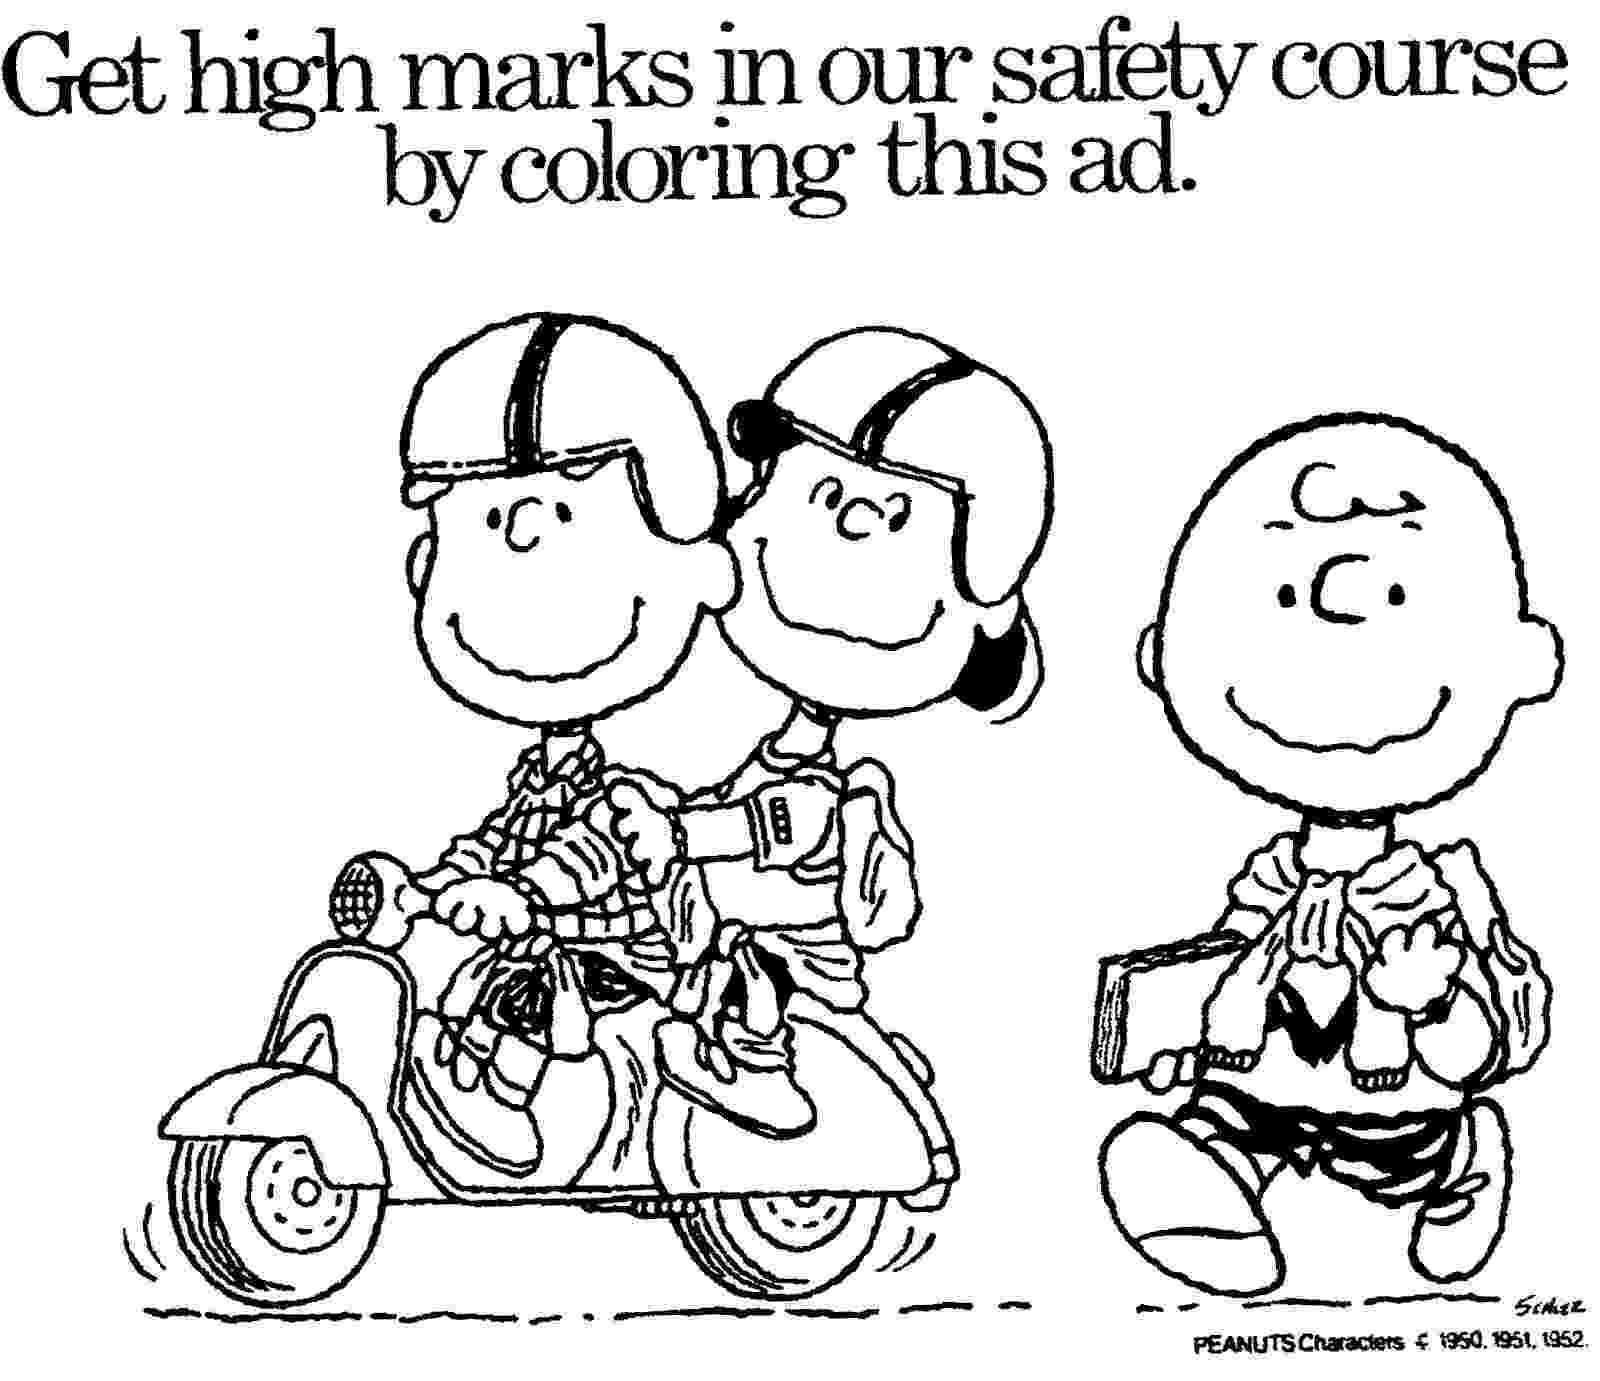 peanuts characters coloring pages peanuts characters thanksgiving coloring pages coloring home peanuts characters pages coloring 